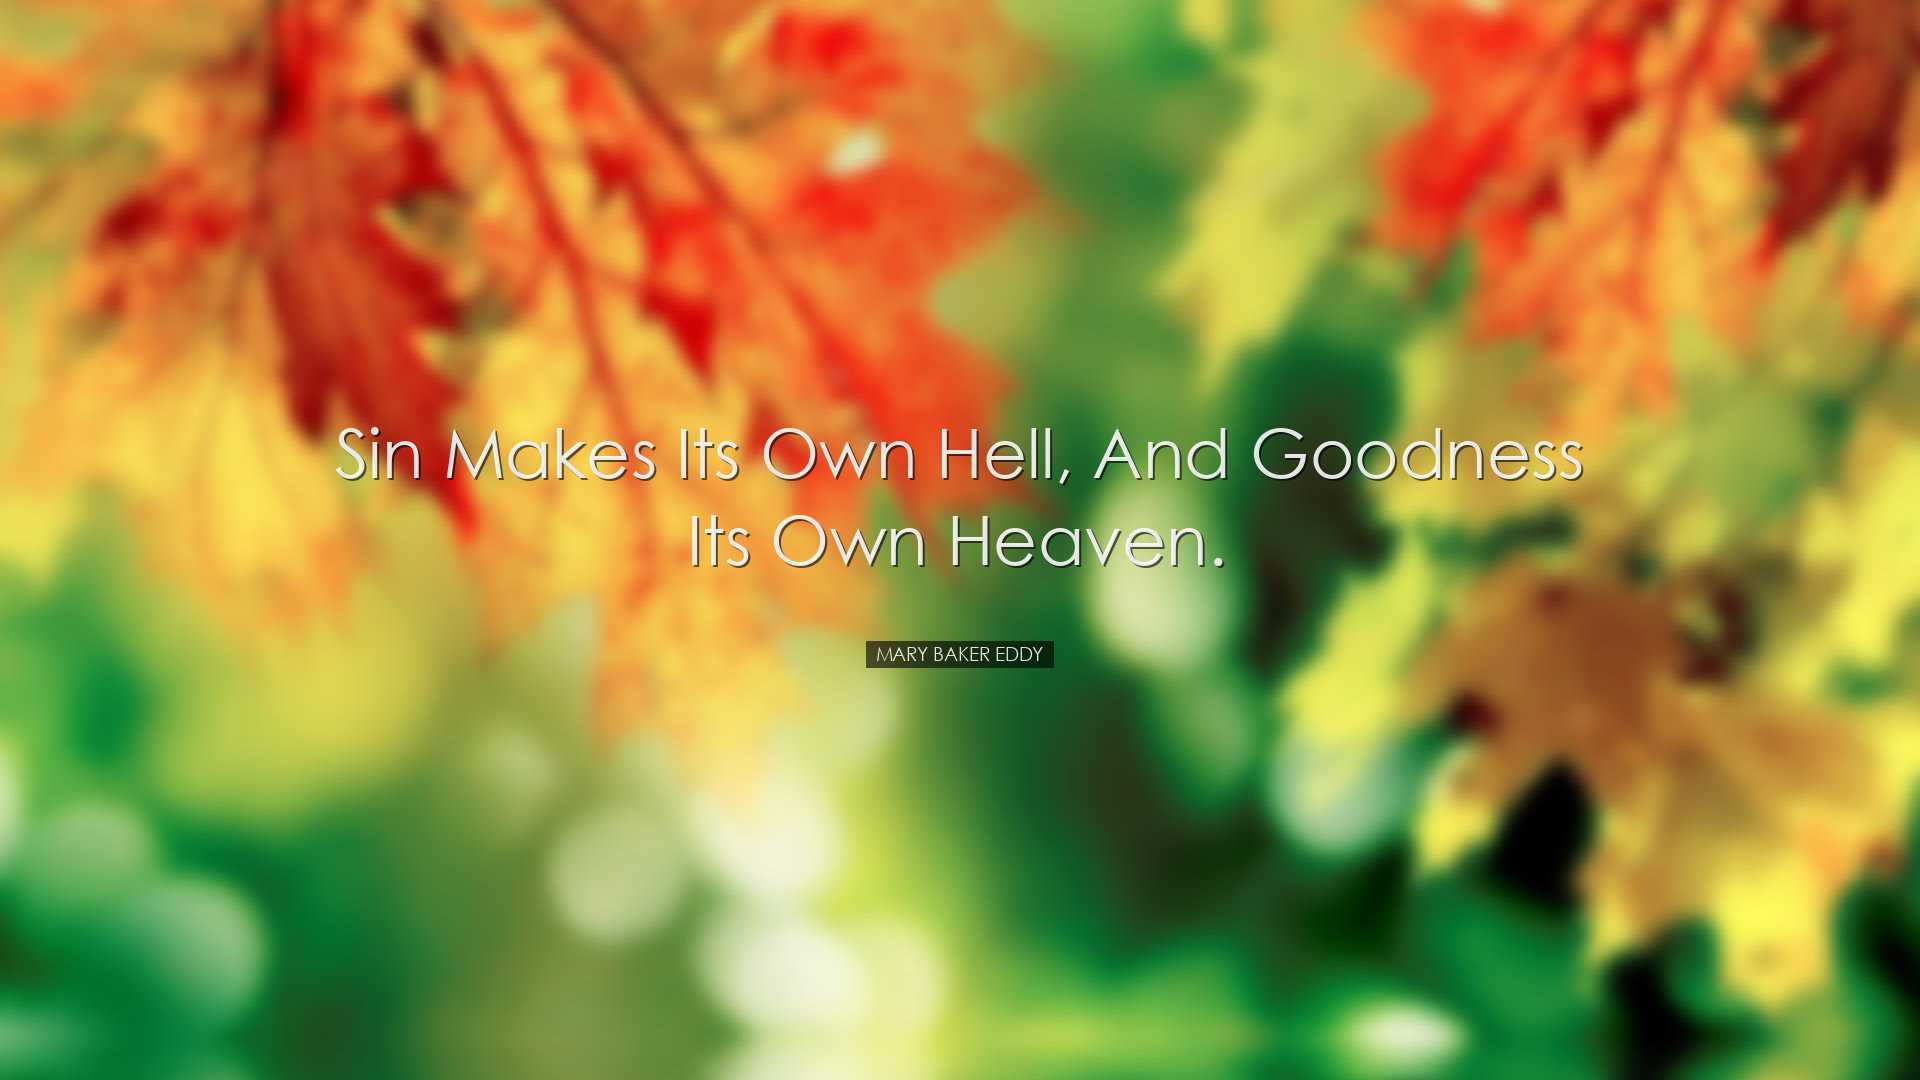 Sin makes its own hell, and goodness its own heaven. - Mary Baker